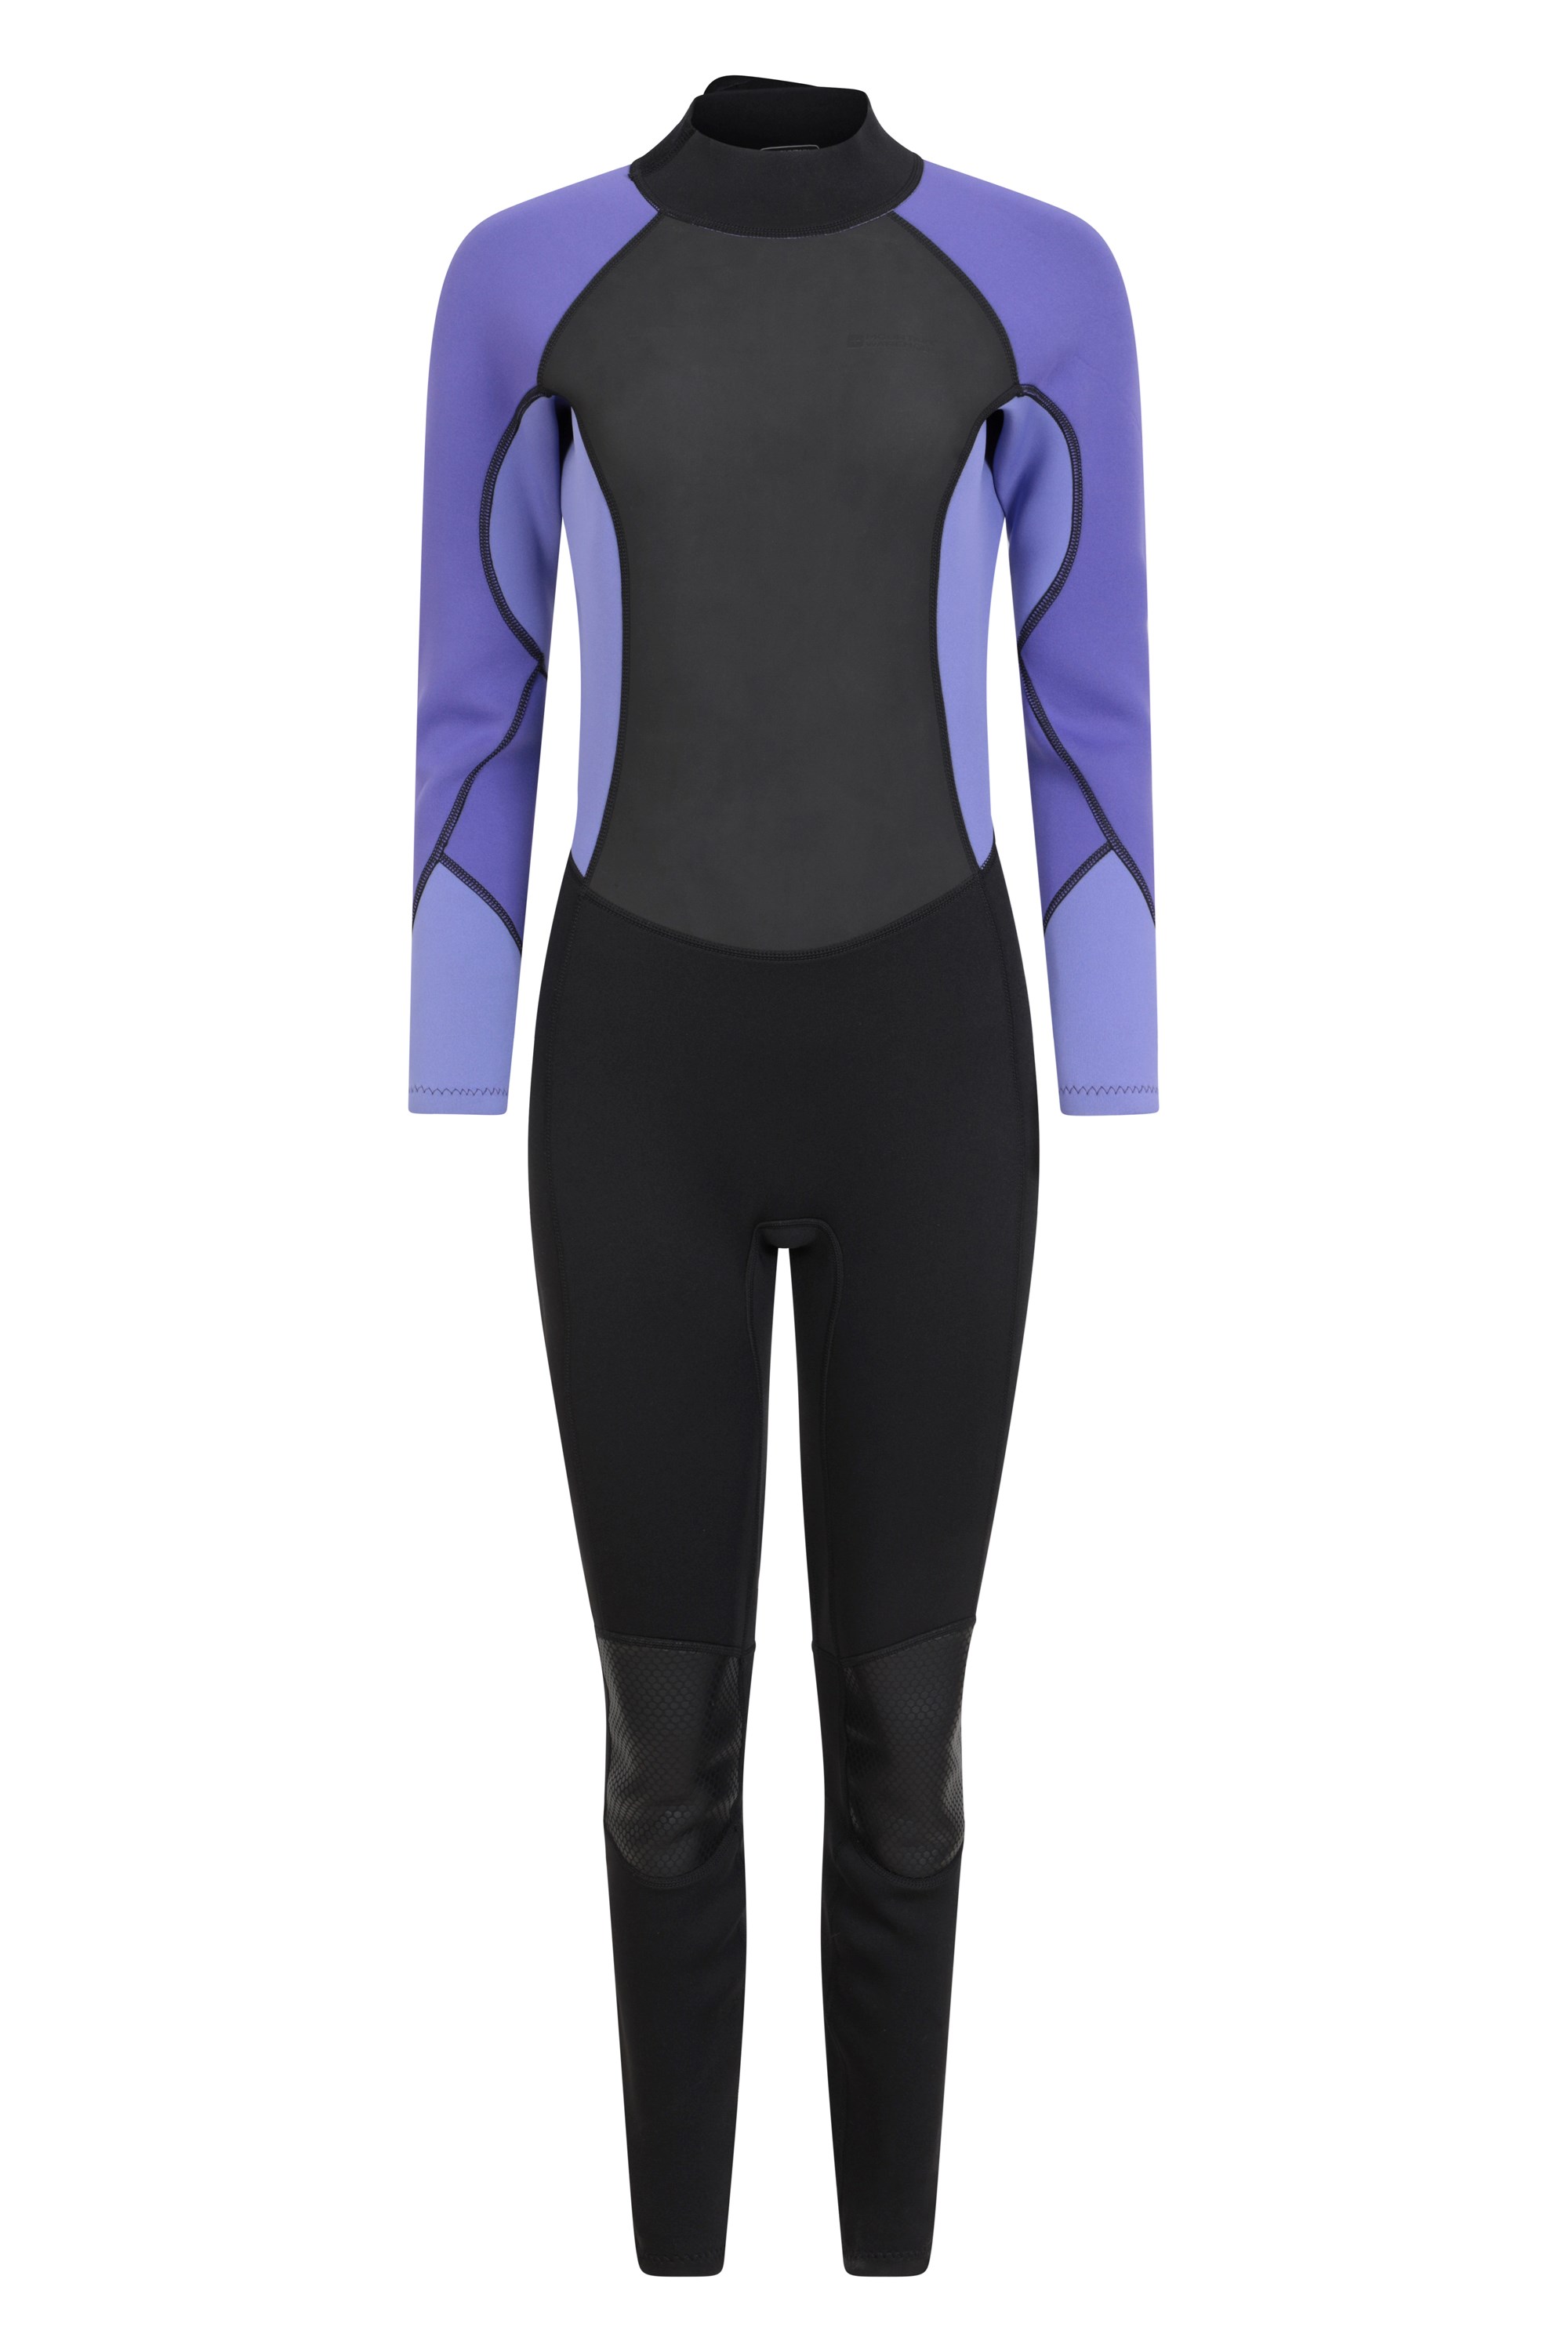 Mountain Warehouse Womens Full Wetsuit - 2.5mm, Neoprene Contour Fit